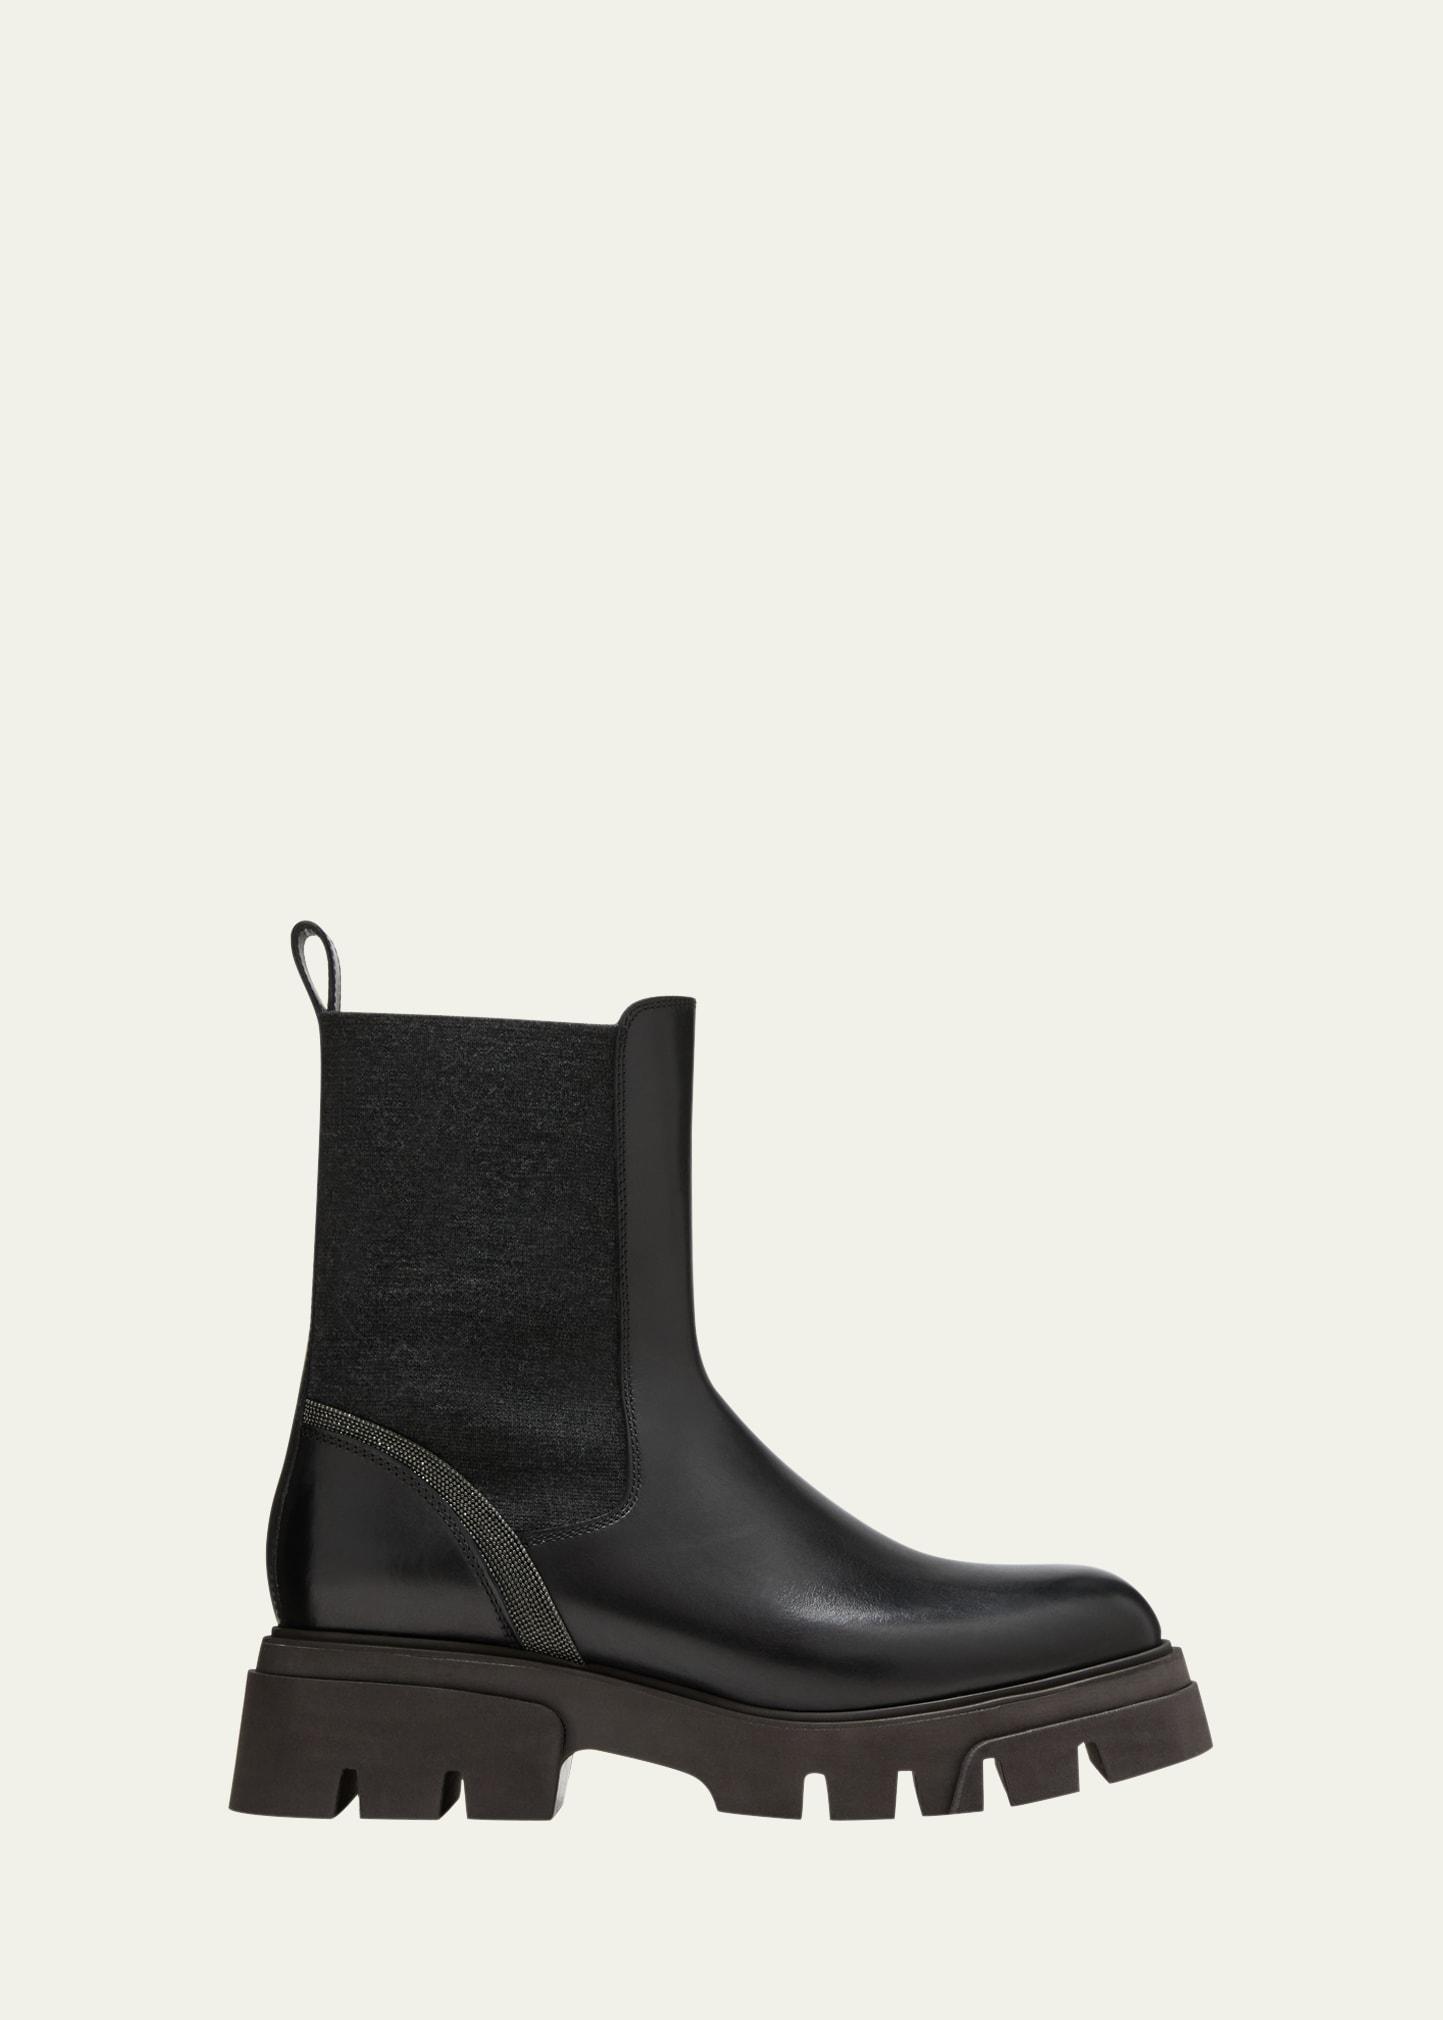 Brunello Cucinelli Leather Wool Lug-sole Chelsea Boots in Black | Lyst